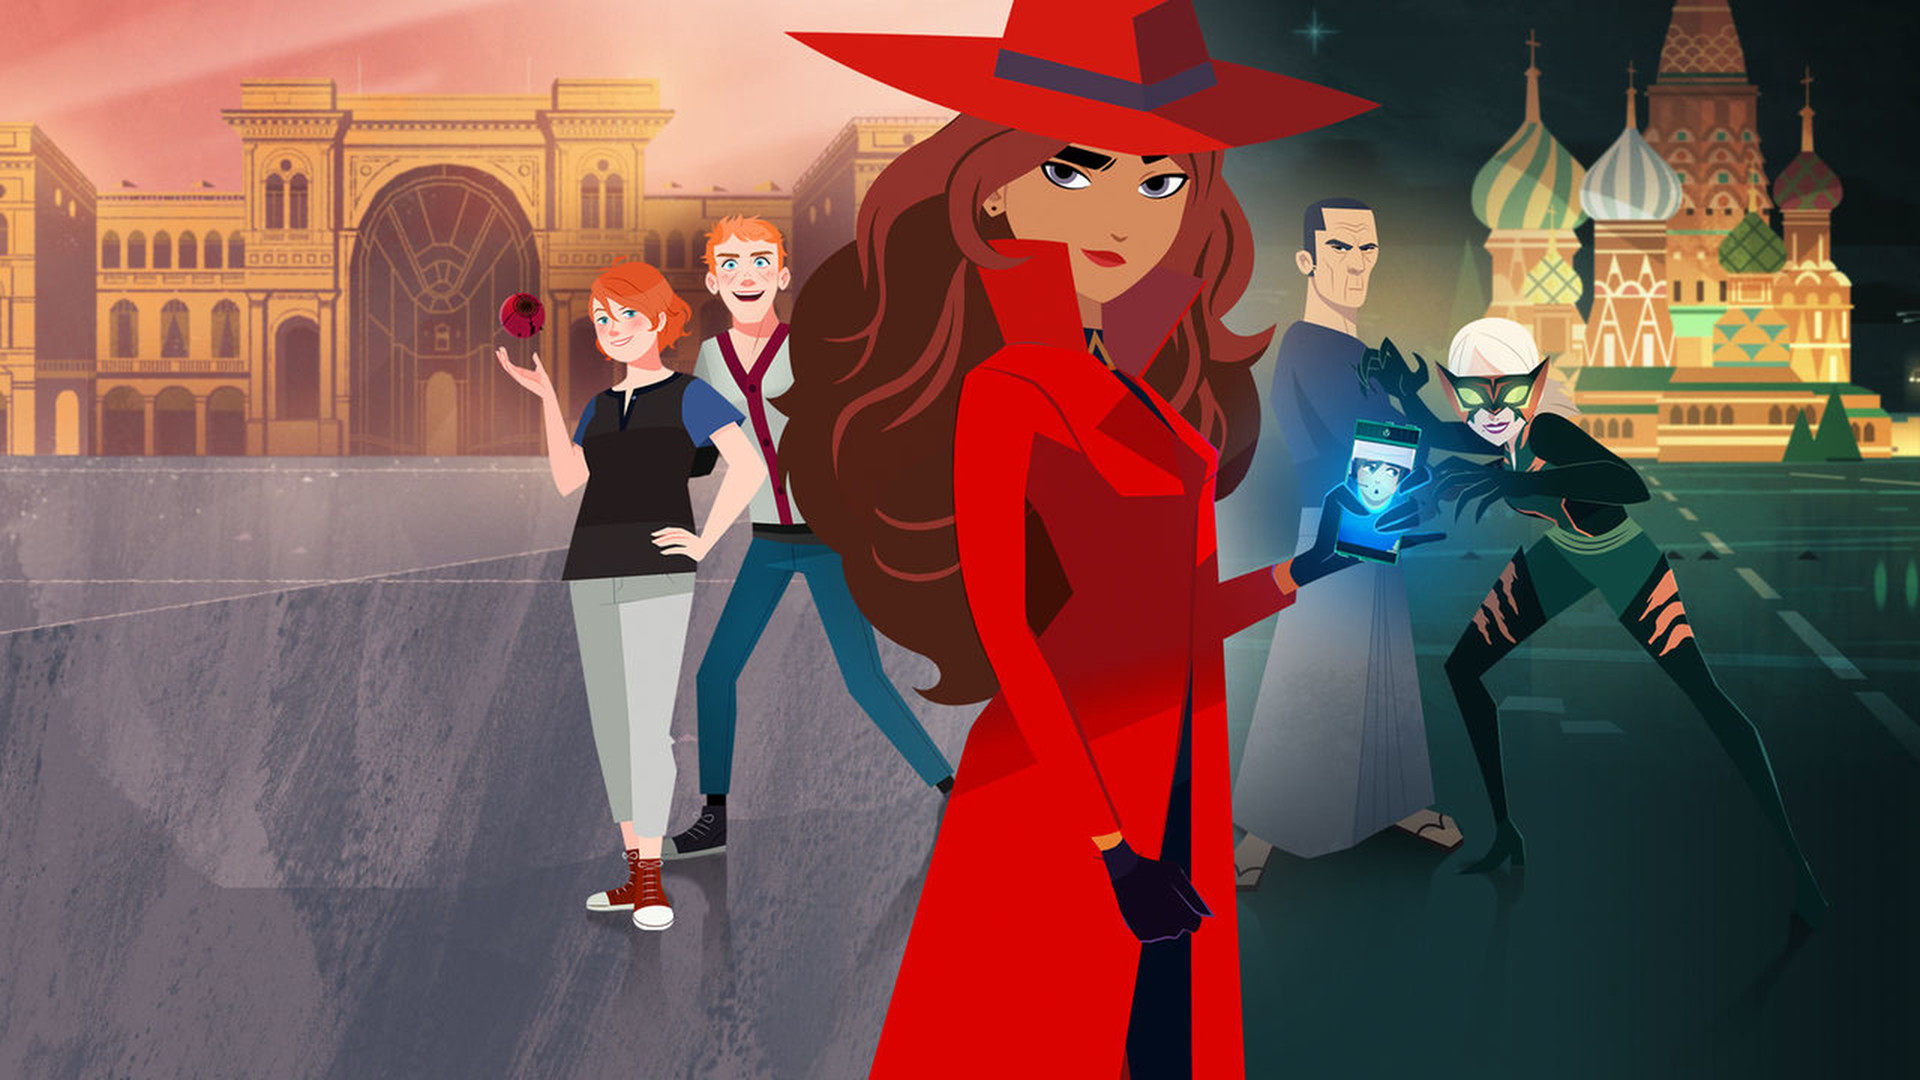 Follow the adventures of Carmen Sandiego, a master thief turned international hero, as she travels the world to stop villains and protect valuable artifacts. This animated series is full of action, mystery, and globe-trotting fun.]]>